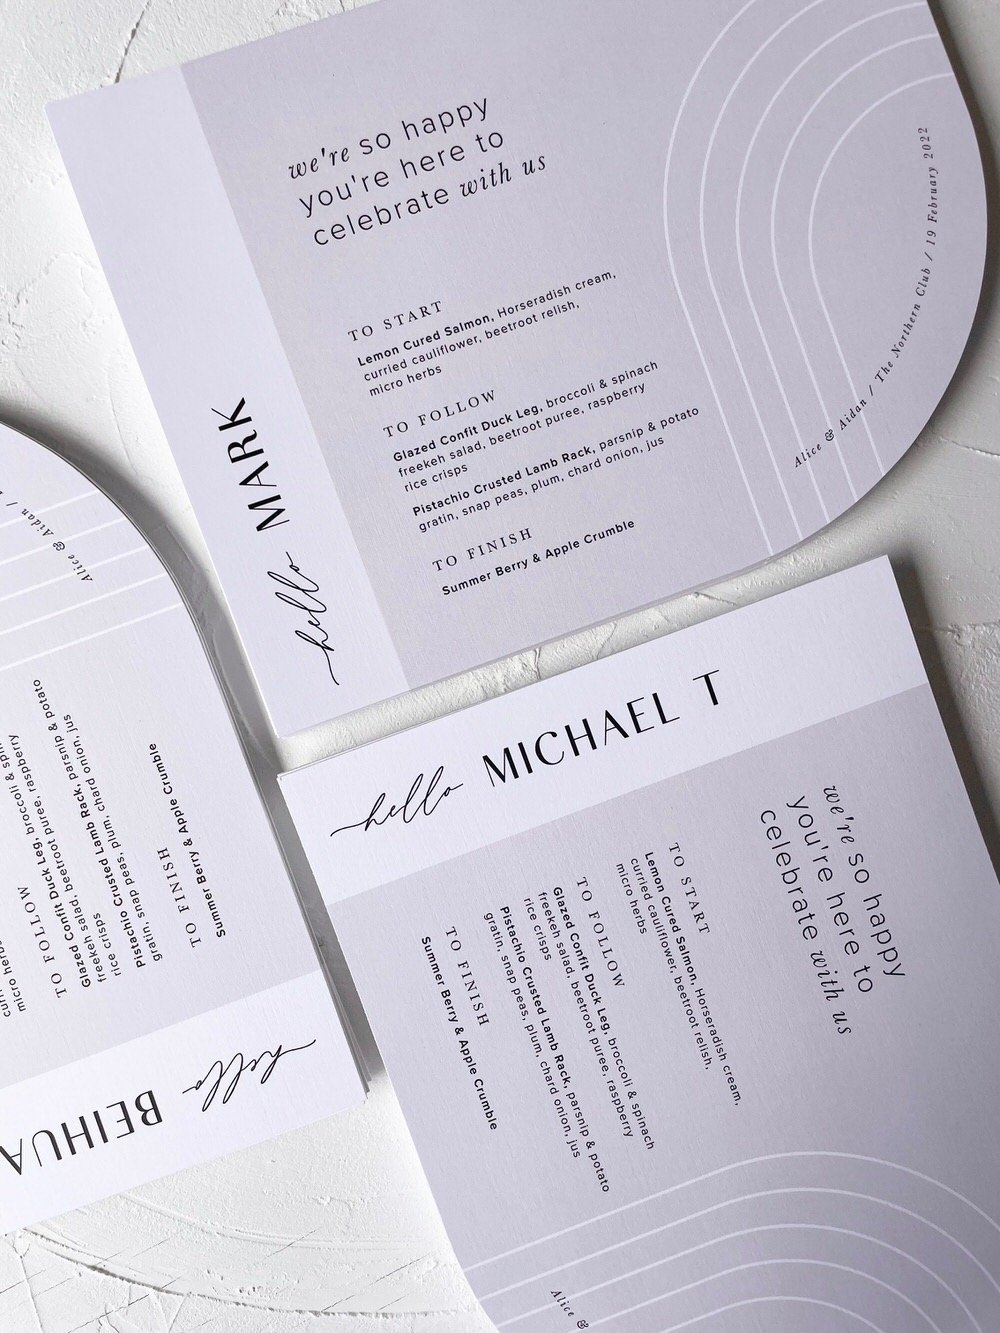 Just My Type Wedding Invitation Stationery NZ Wedding Menu Place Name Table Number7124.jpg